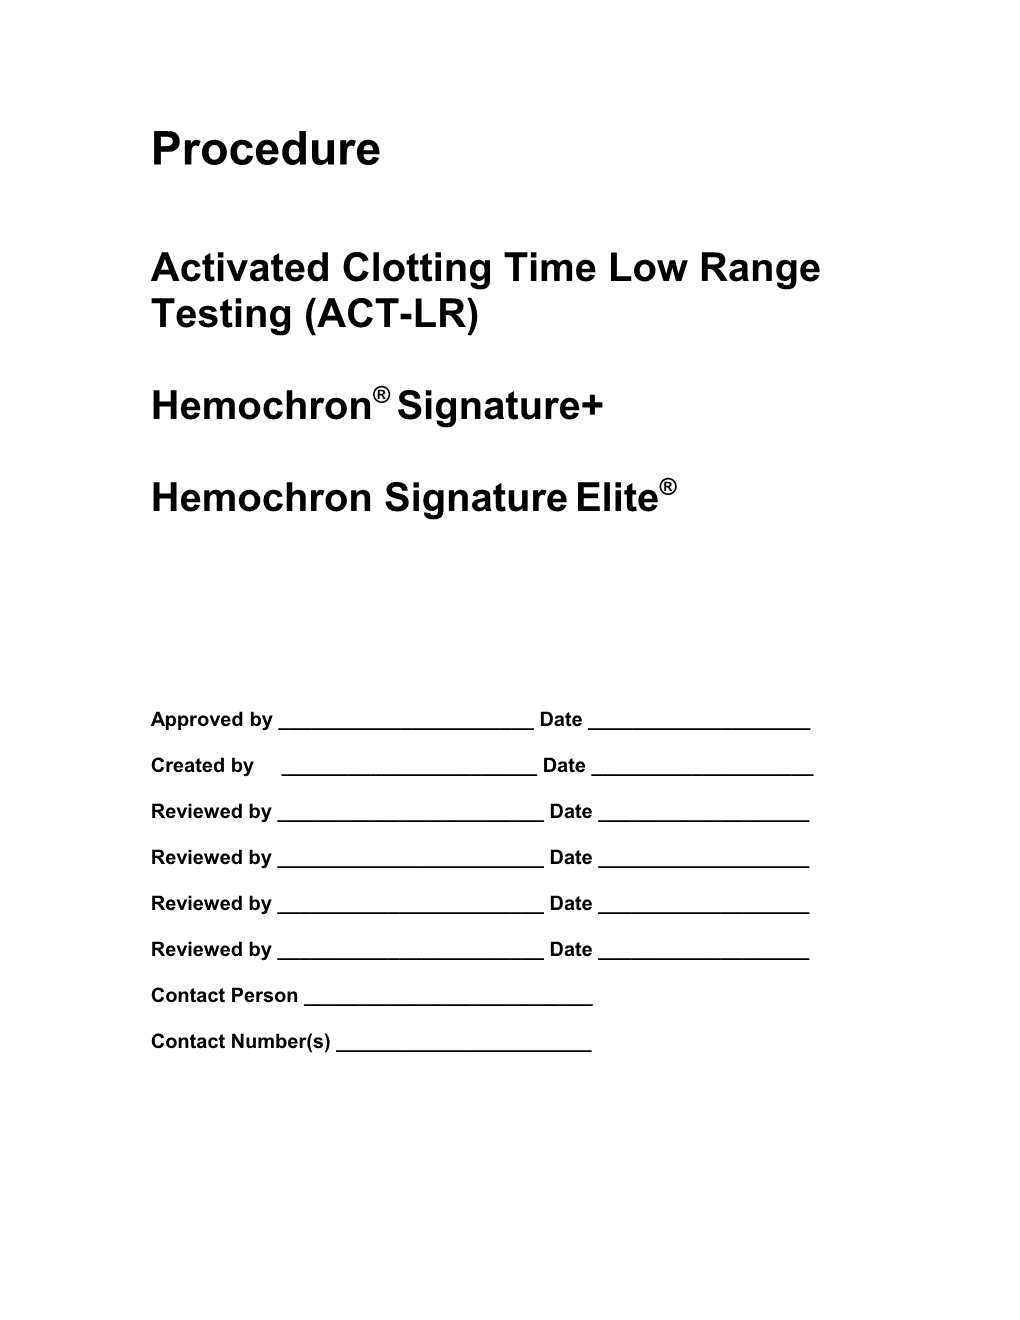 Activated Clotting Timelowrange Testing (ACT-LR)